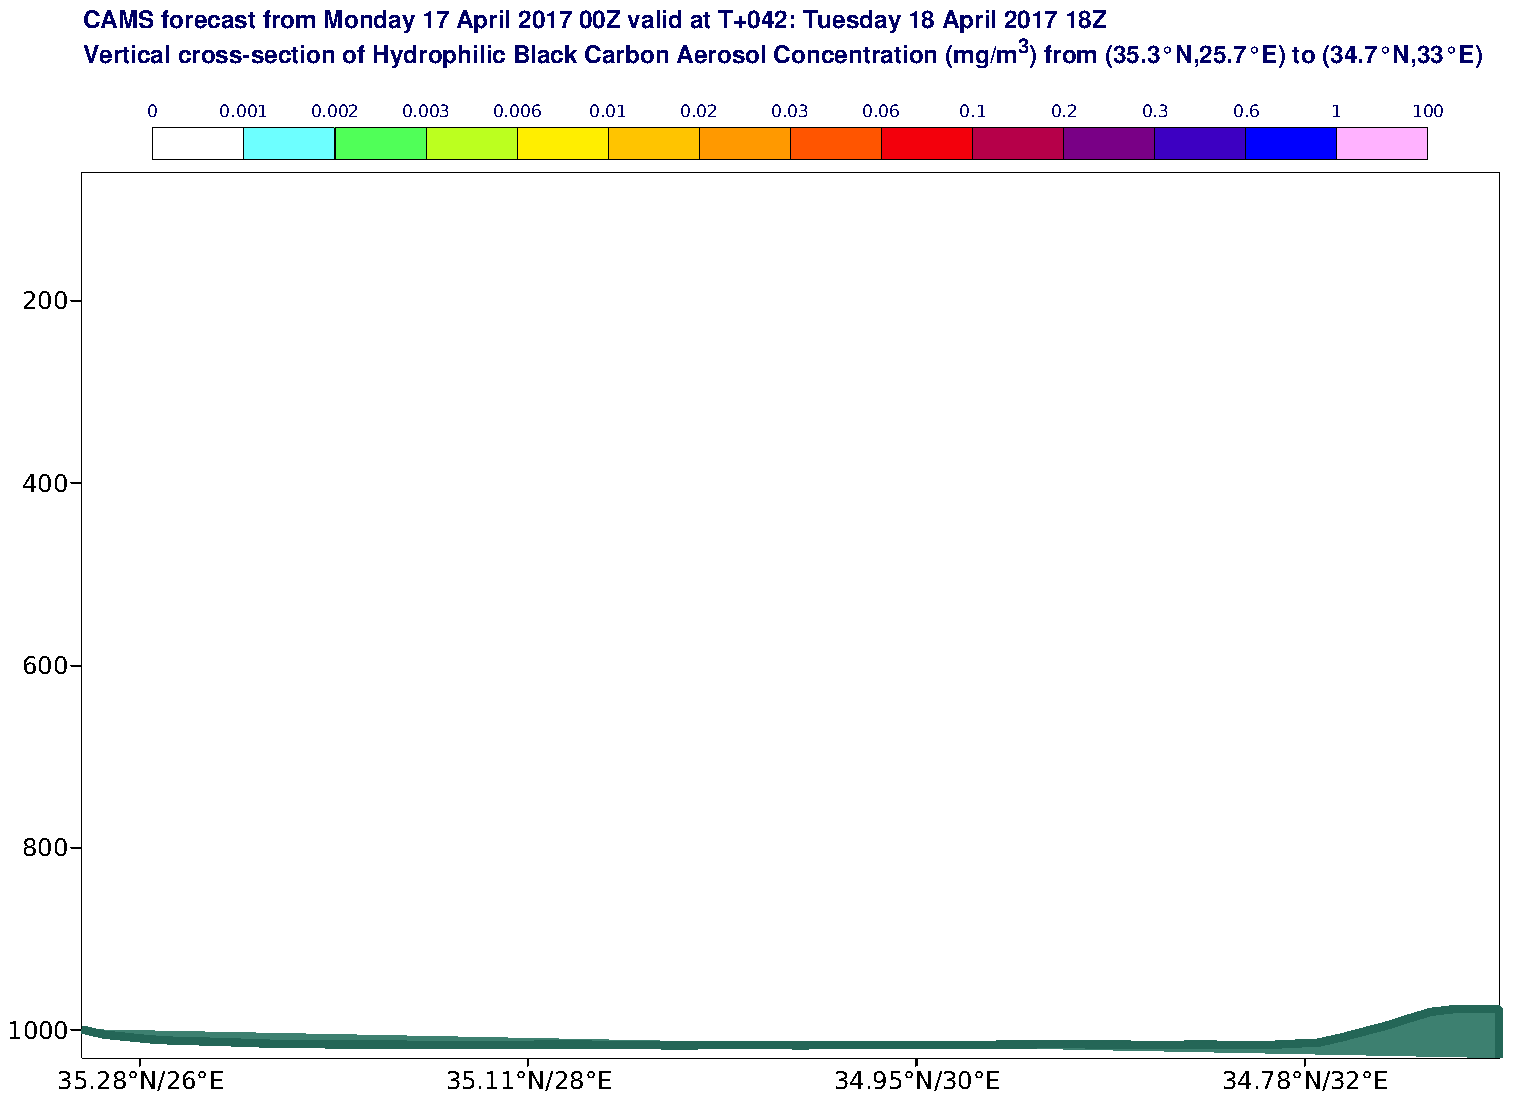 Vertical cross-section of Hydrophilic Black Carbon Aerosol Concentration (mg/m3) valid at T42 - 2017-04-18 18:00